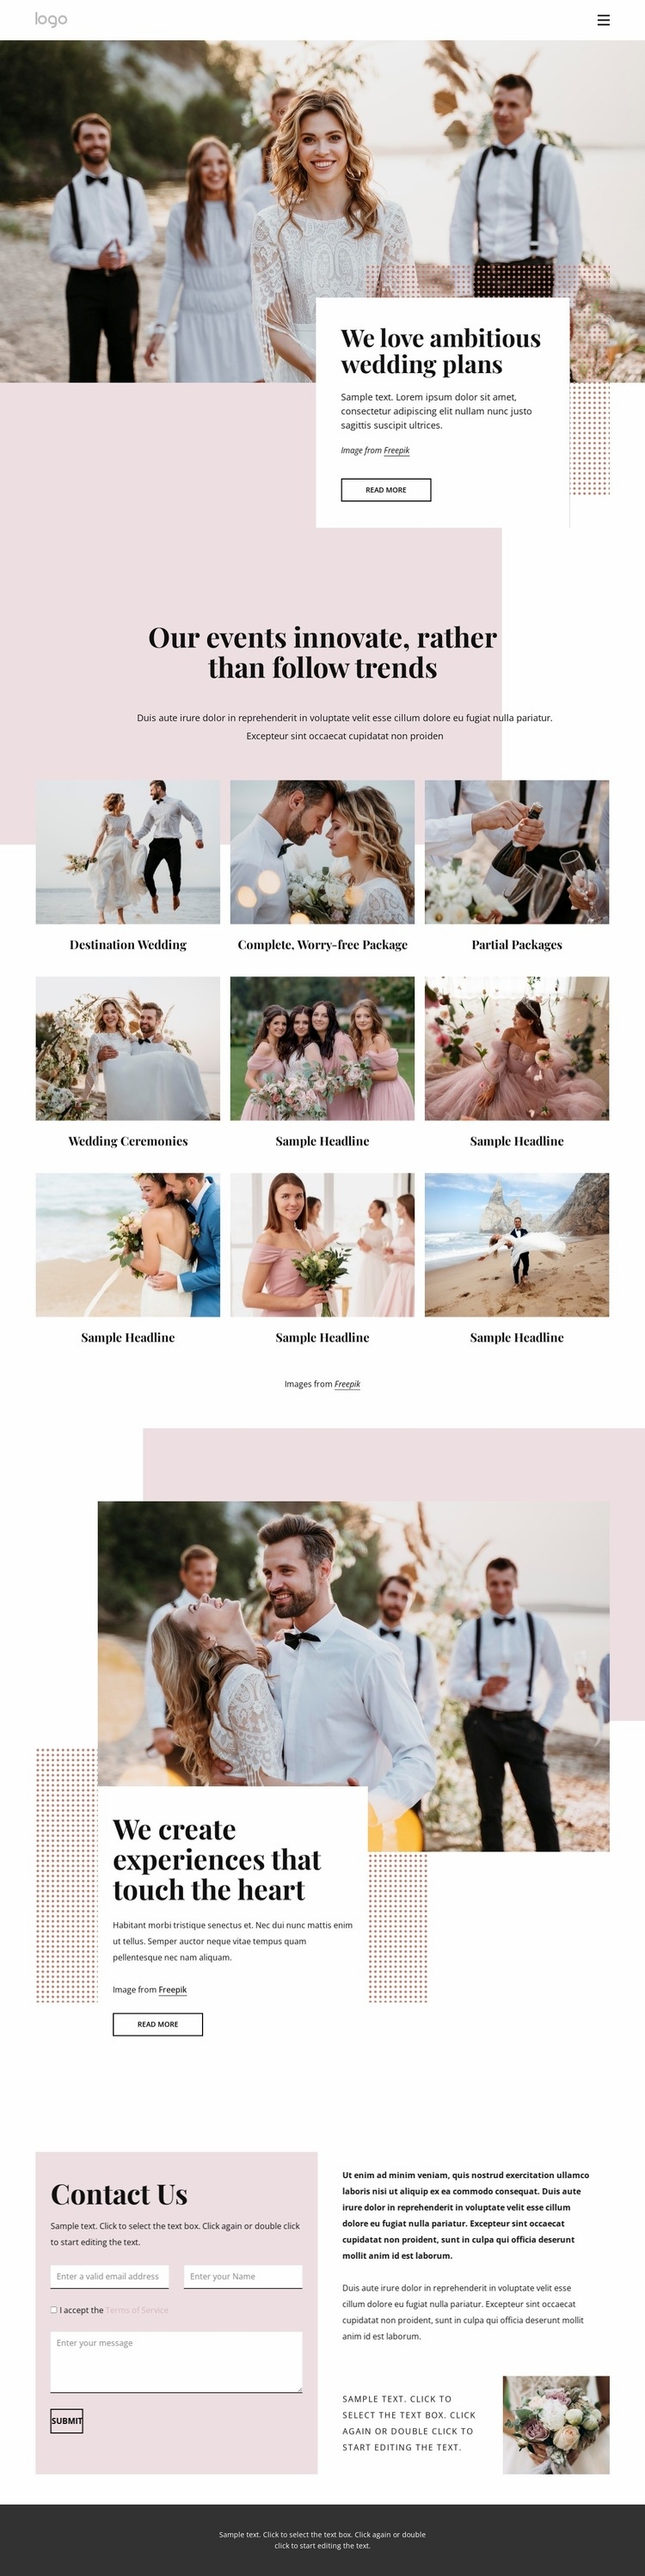 We love ambitious wedding plans Html Code Example